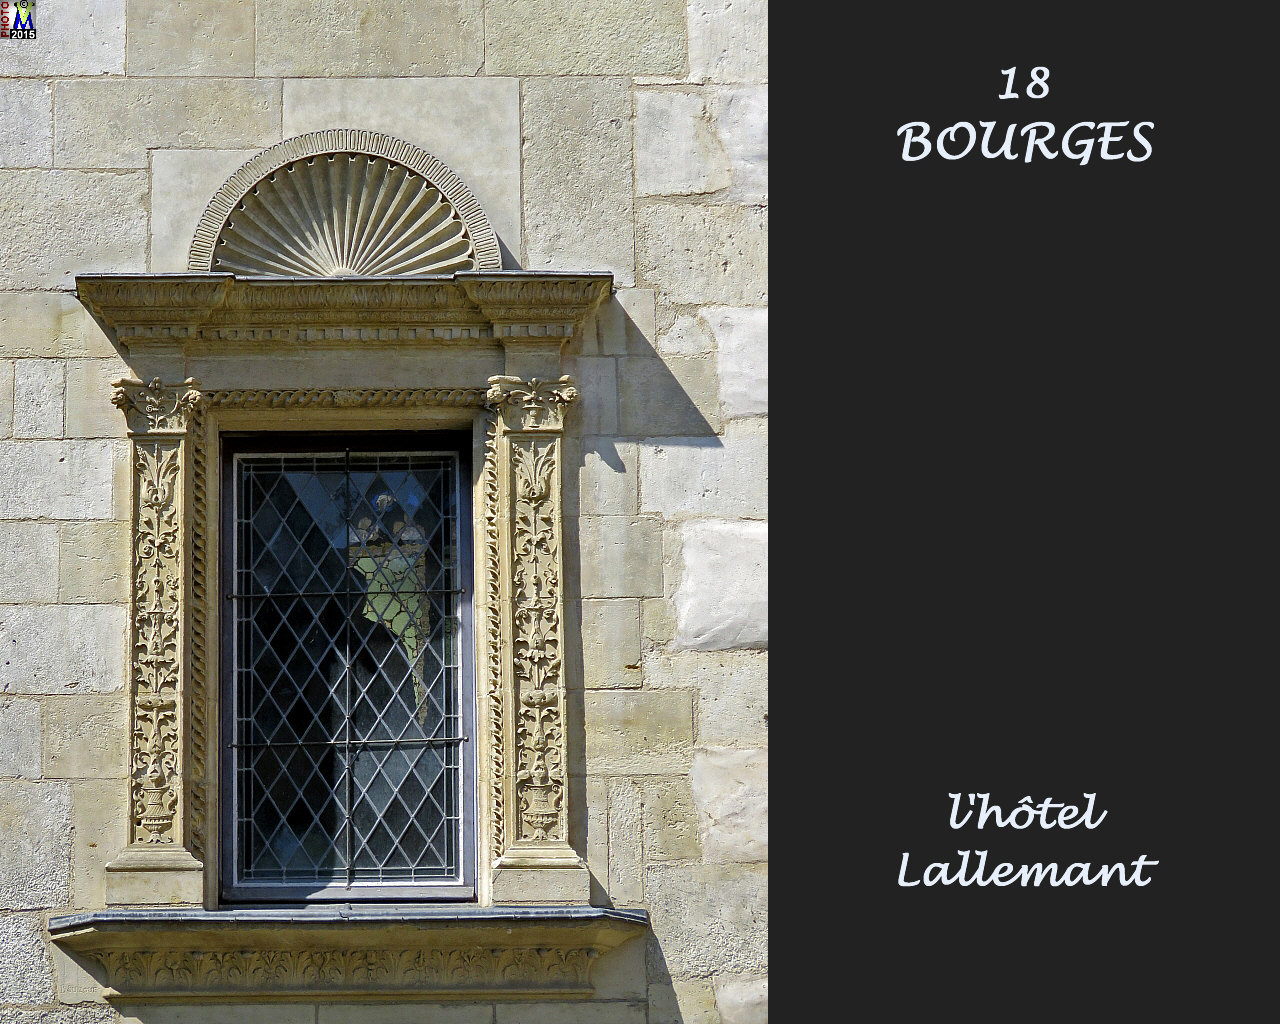 18BOURGES-hotelLallemant_104.jpg